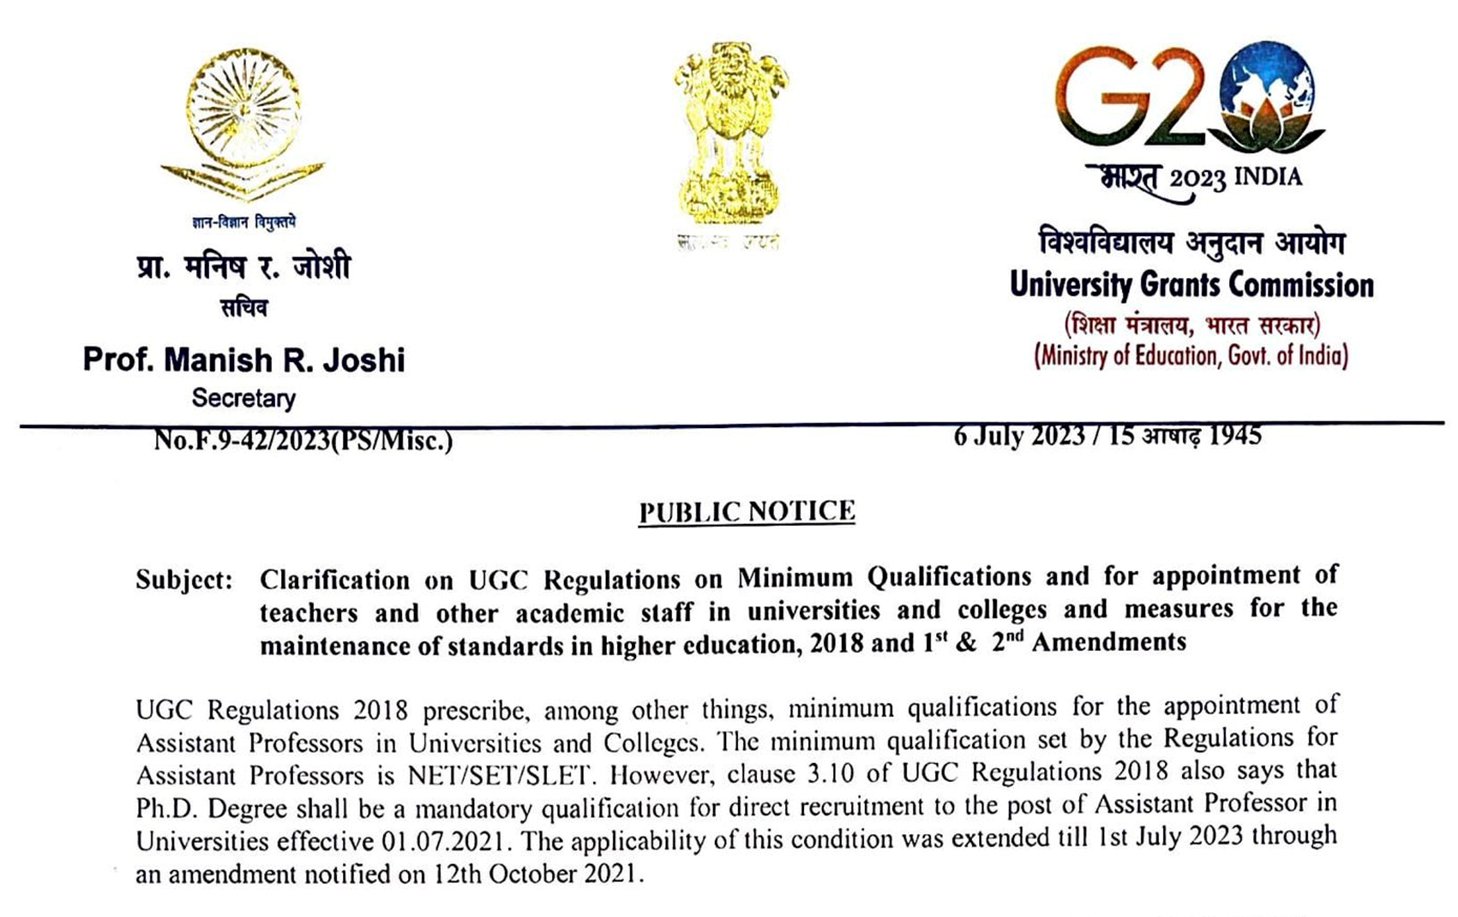 Clarification on UGC Minimum Qualifications for Faculty Appointment